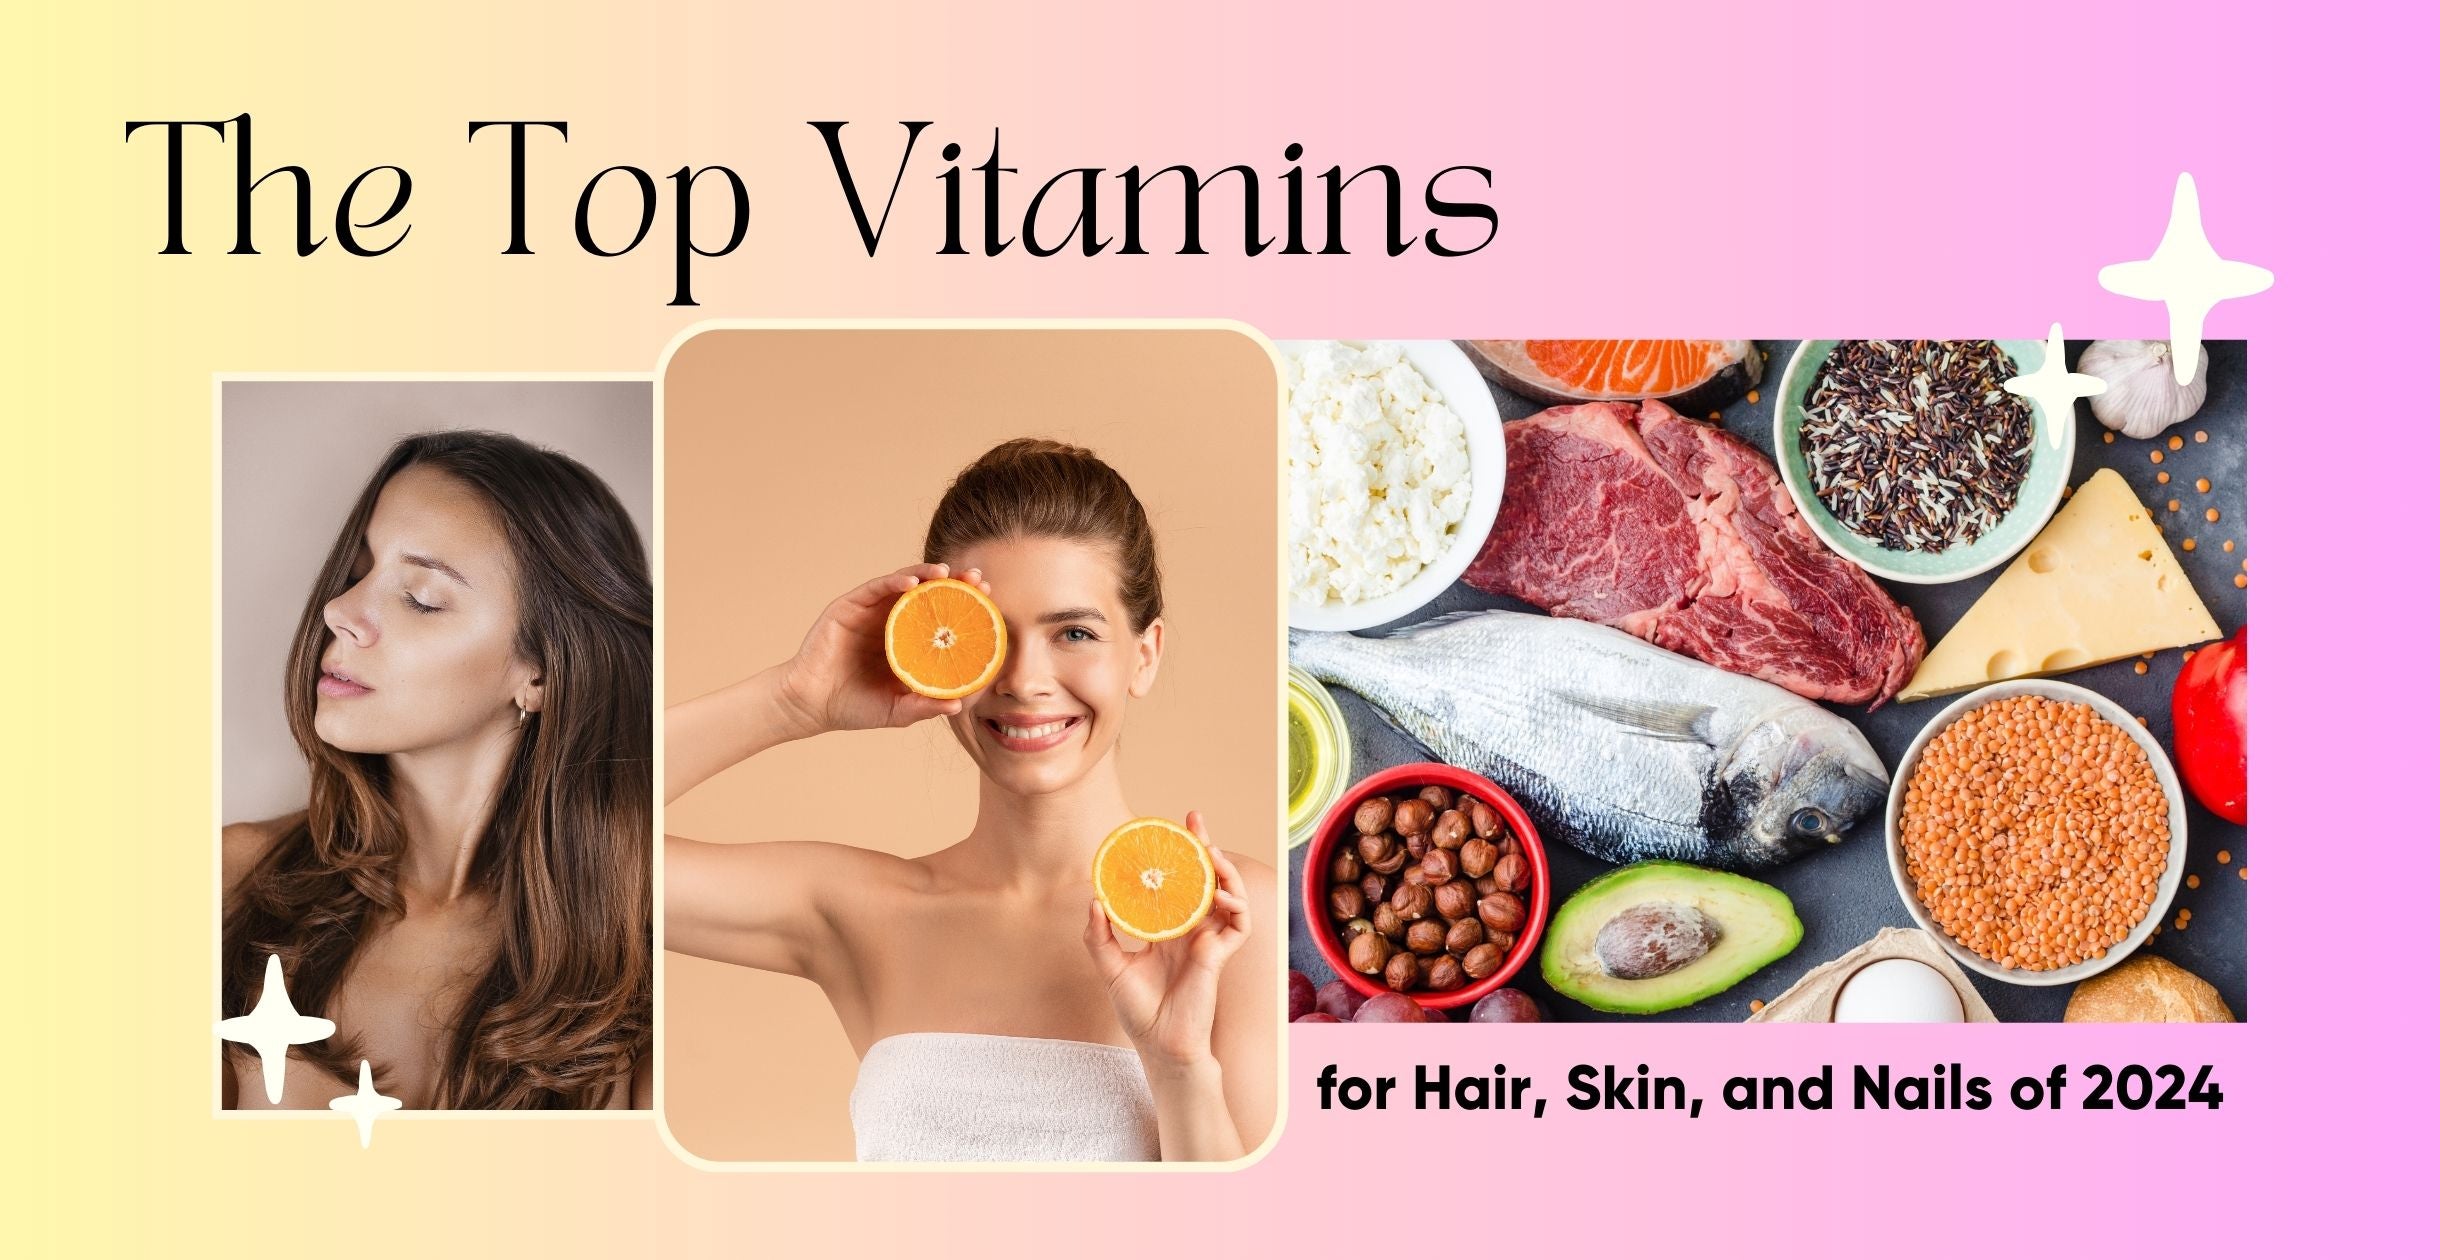 The Top Vitamins for Hair, Skin, and Nails of 2024